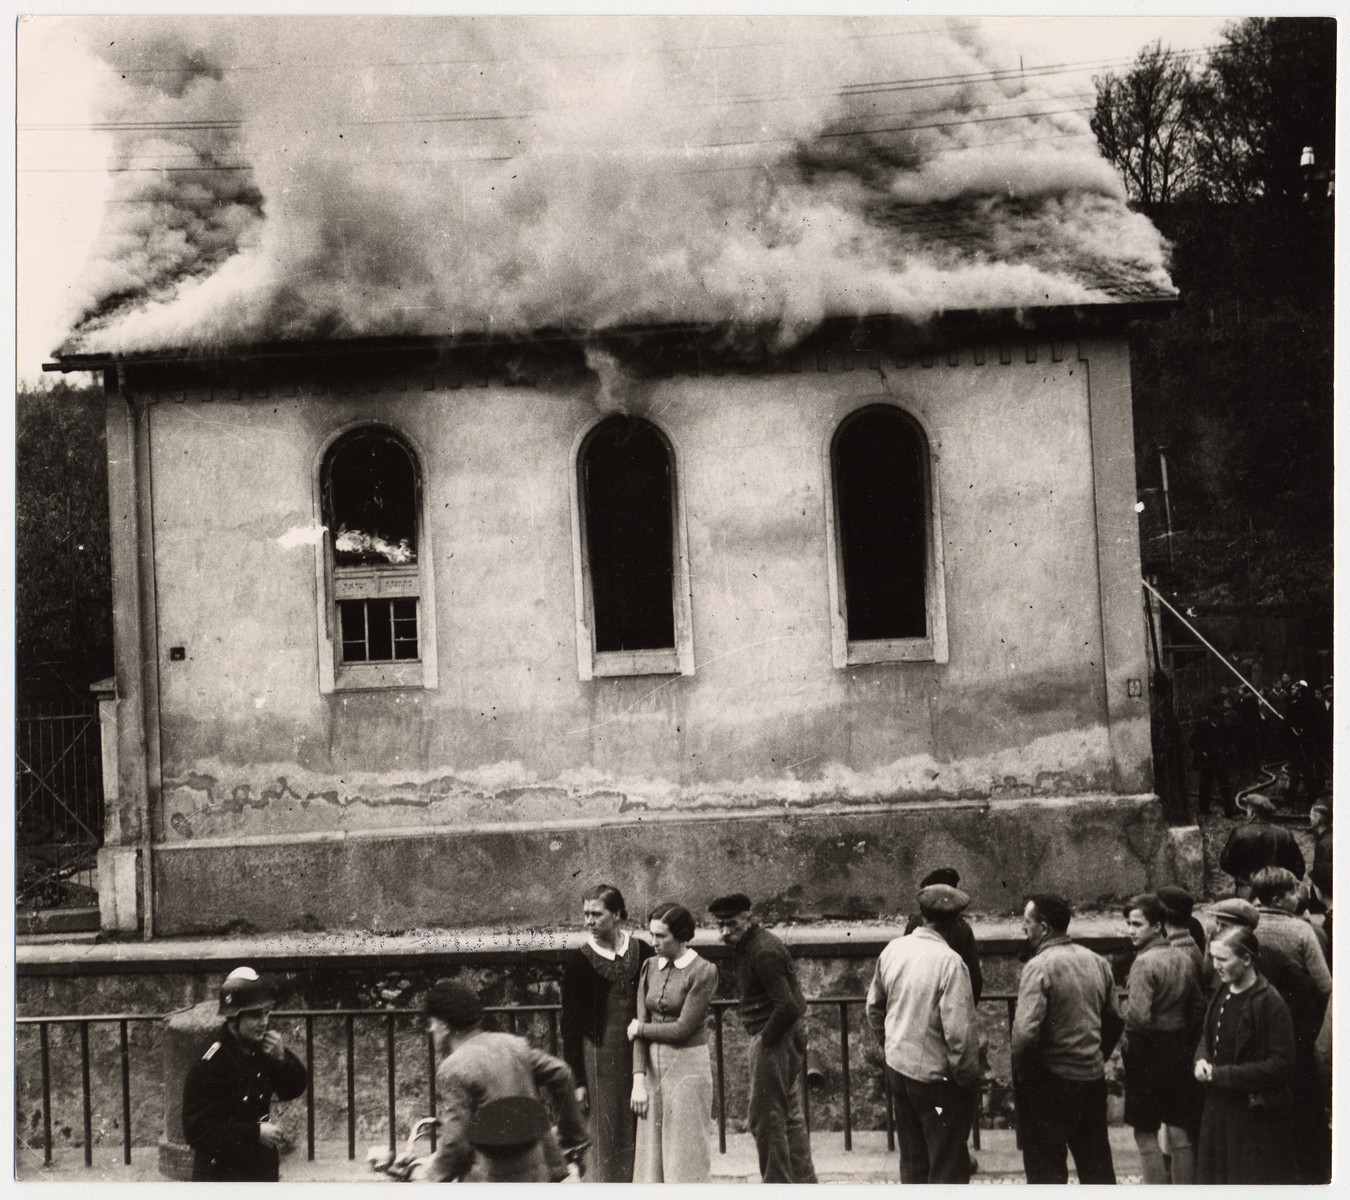 On the morning after Kristallnacht local residents watch as the Ober Ramstadt synagogue is destroyed by fire.   The local fire department prevented the fire from spreading to a nearby home, but did not try to limit the damage to the synagogue.

The youth who took the series of photographs of the burning synagogue in Ober-Ramstadt, Georg Schmidt,  came from a family that opposed the Nazis.  The film was confiscated by police from Schmidt's home the same day the photos were taken, and developed immediately.  The prints and negatives were stored in the city hall until a policeman in the service of the American occupation found them and removed them.  The son-in-law of the policeman found them in a toolbox and donated them to the city archive.